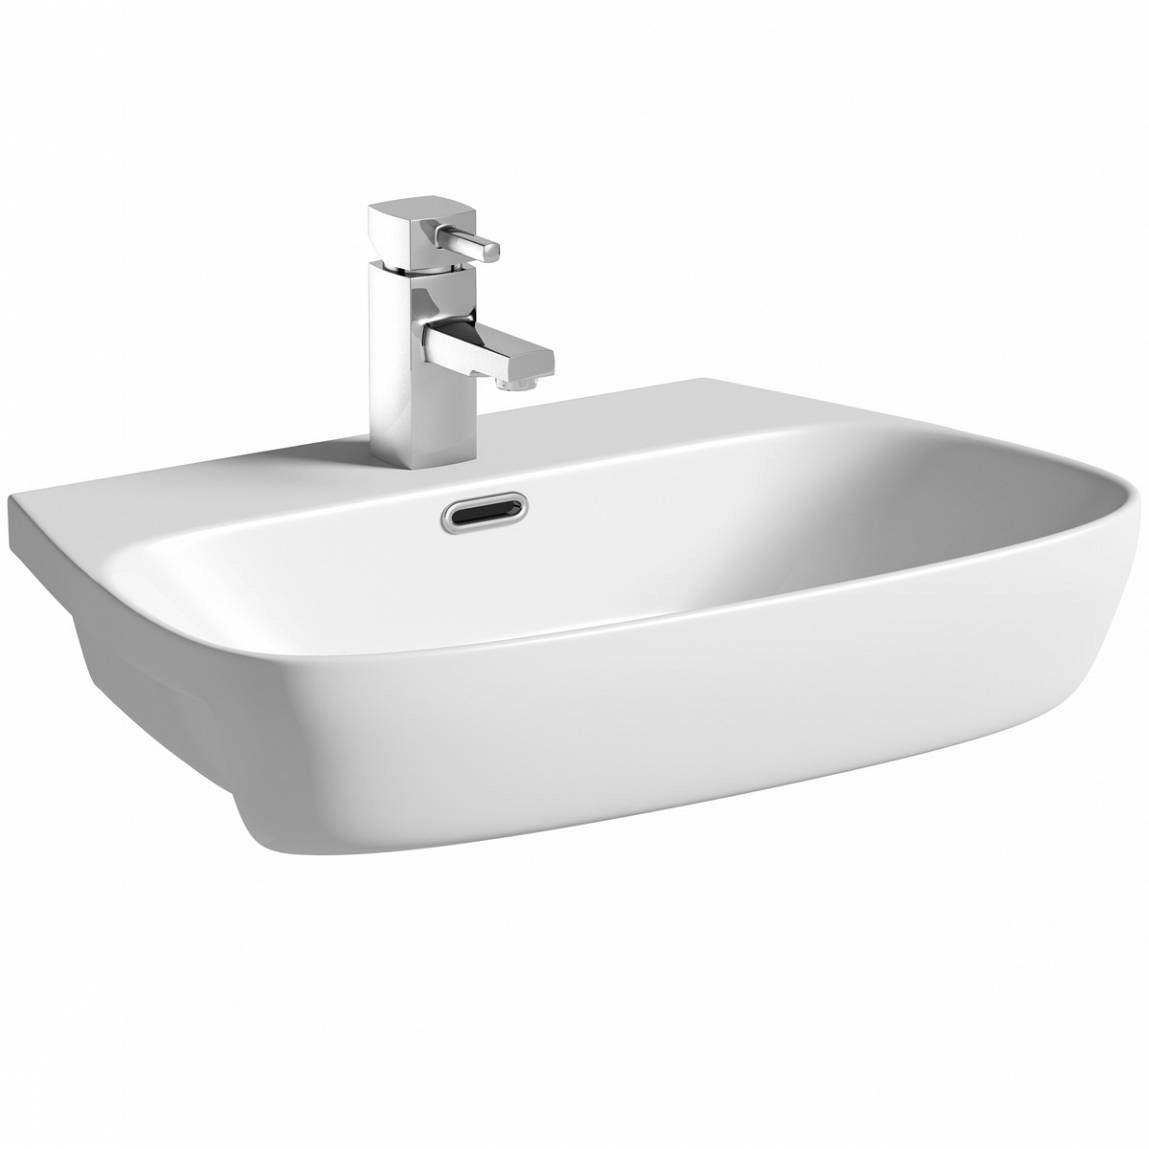 Mode Foster 1 tap hole semi recessed countertop basin 600mm